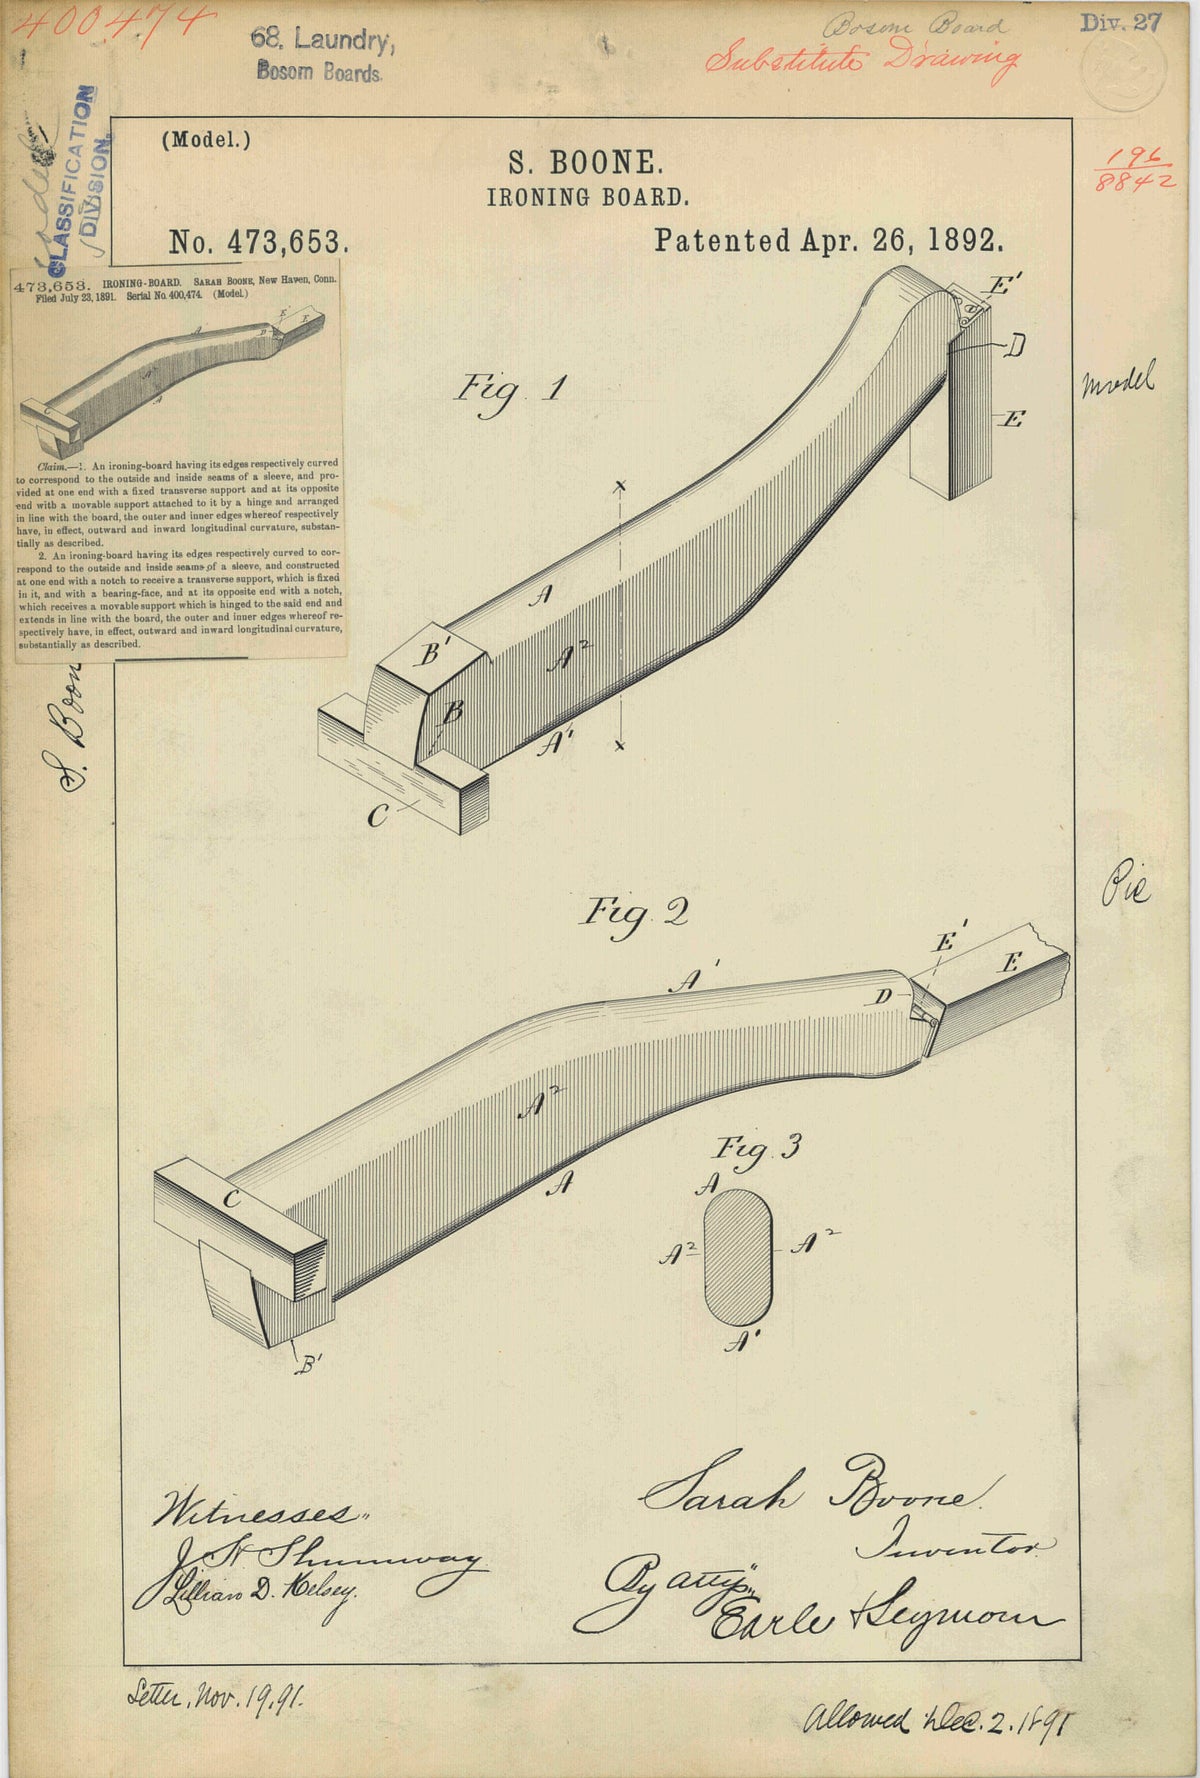 Patent drawing for Sarah Boone's ironing board.